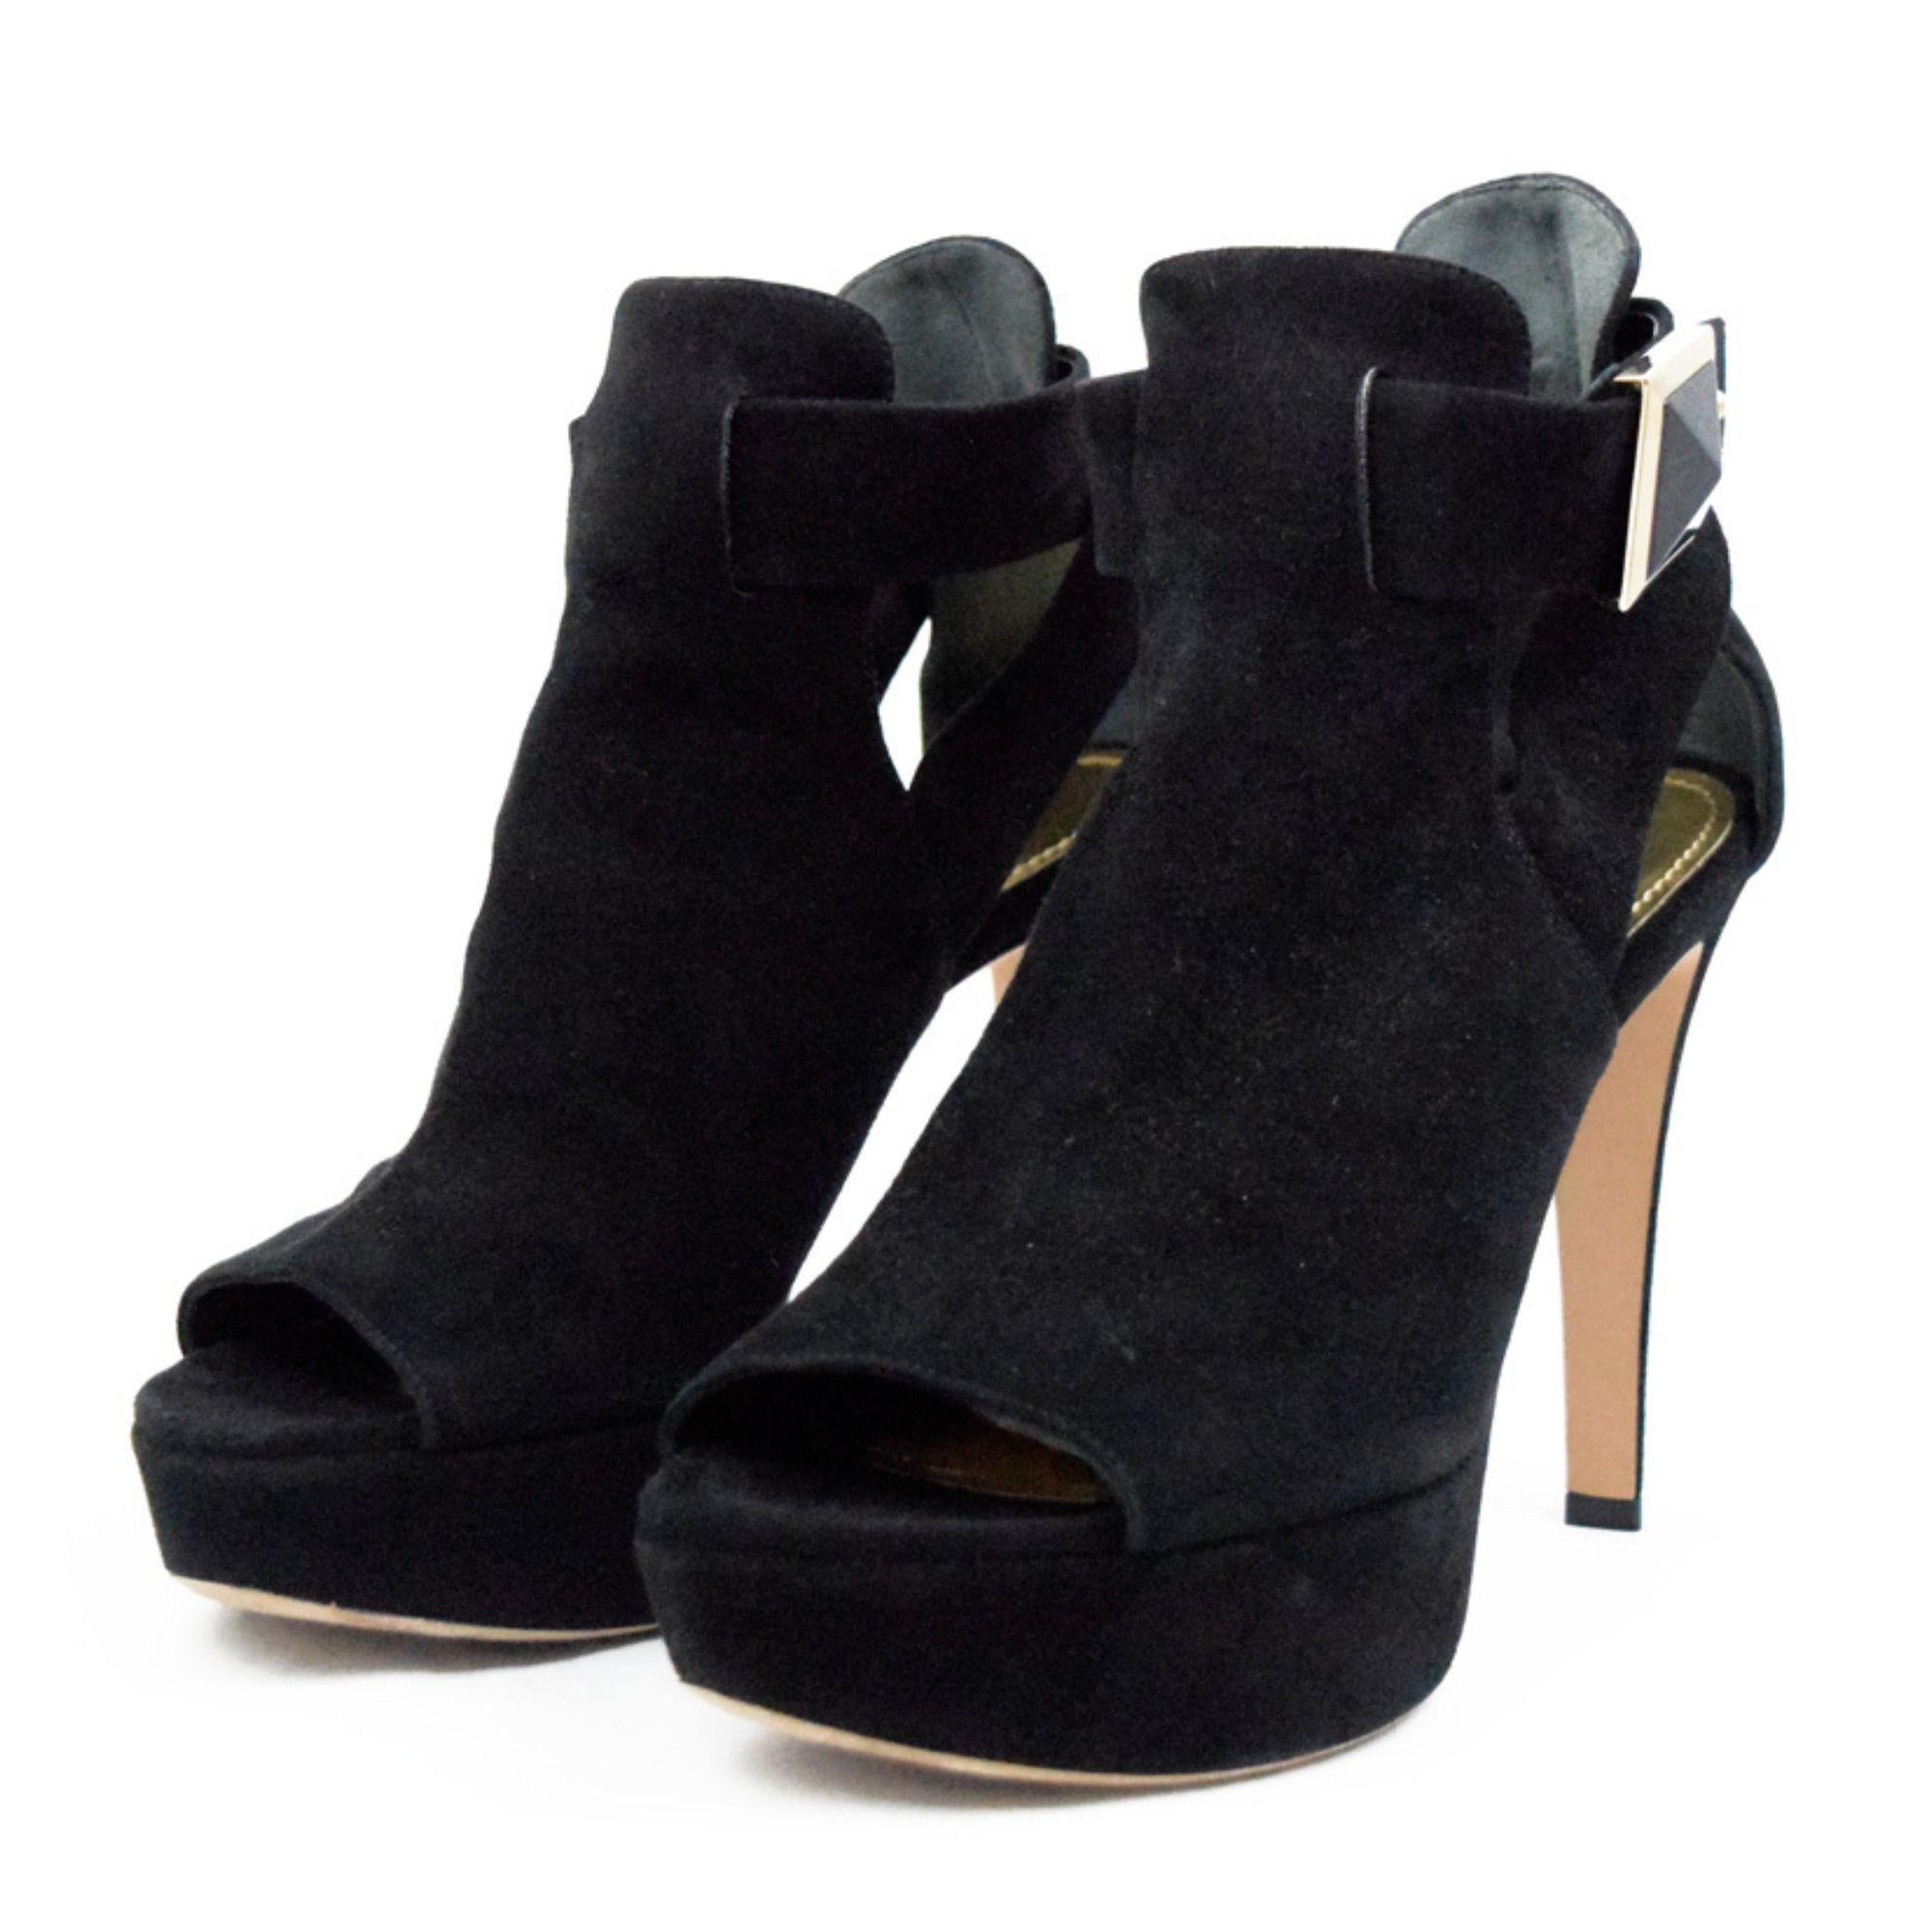 Black pumps with square logo buckle. 
Material: Suede
Heel type: Open-toe cutout sandals
Size: EU 37.5
Heel length: 12cm
Includes (extras): Dust bag
Overall Condition: Good
Interior Condition: signs of use
Exterior Condition: Aging in the suede.

